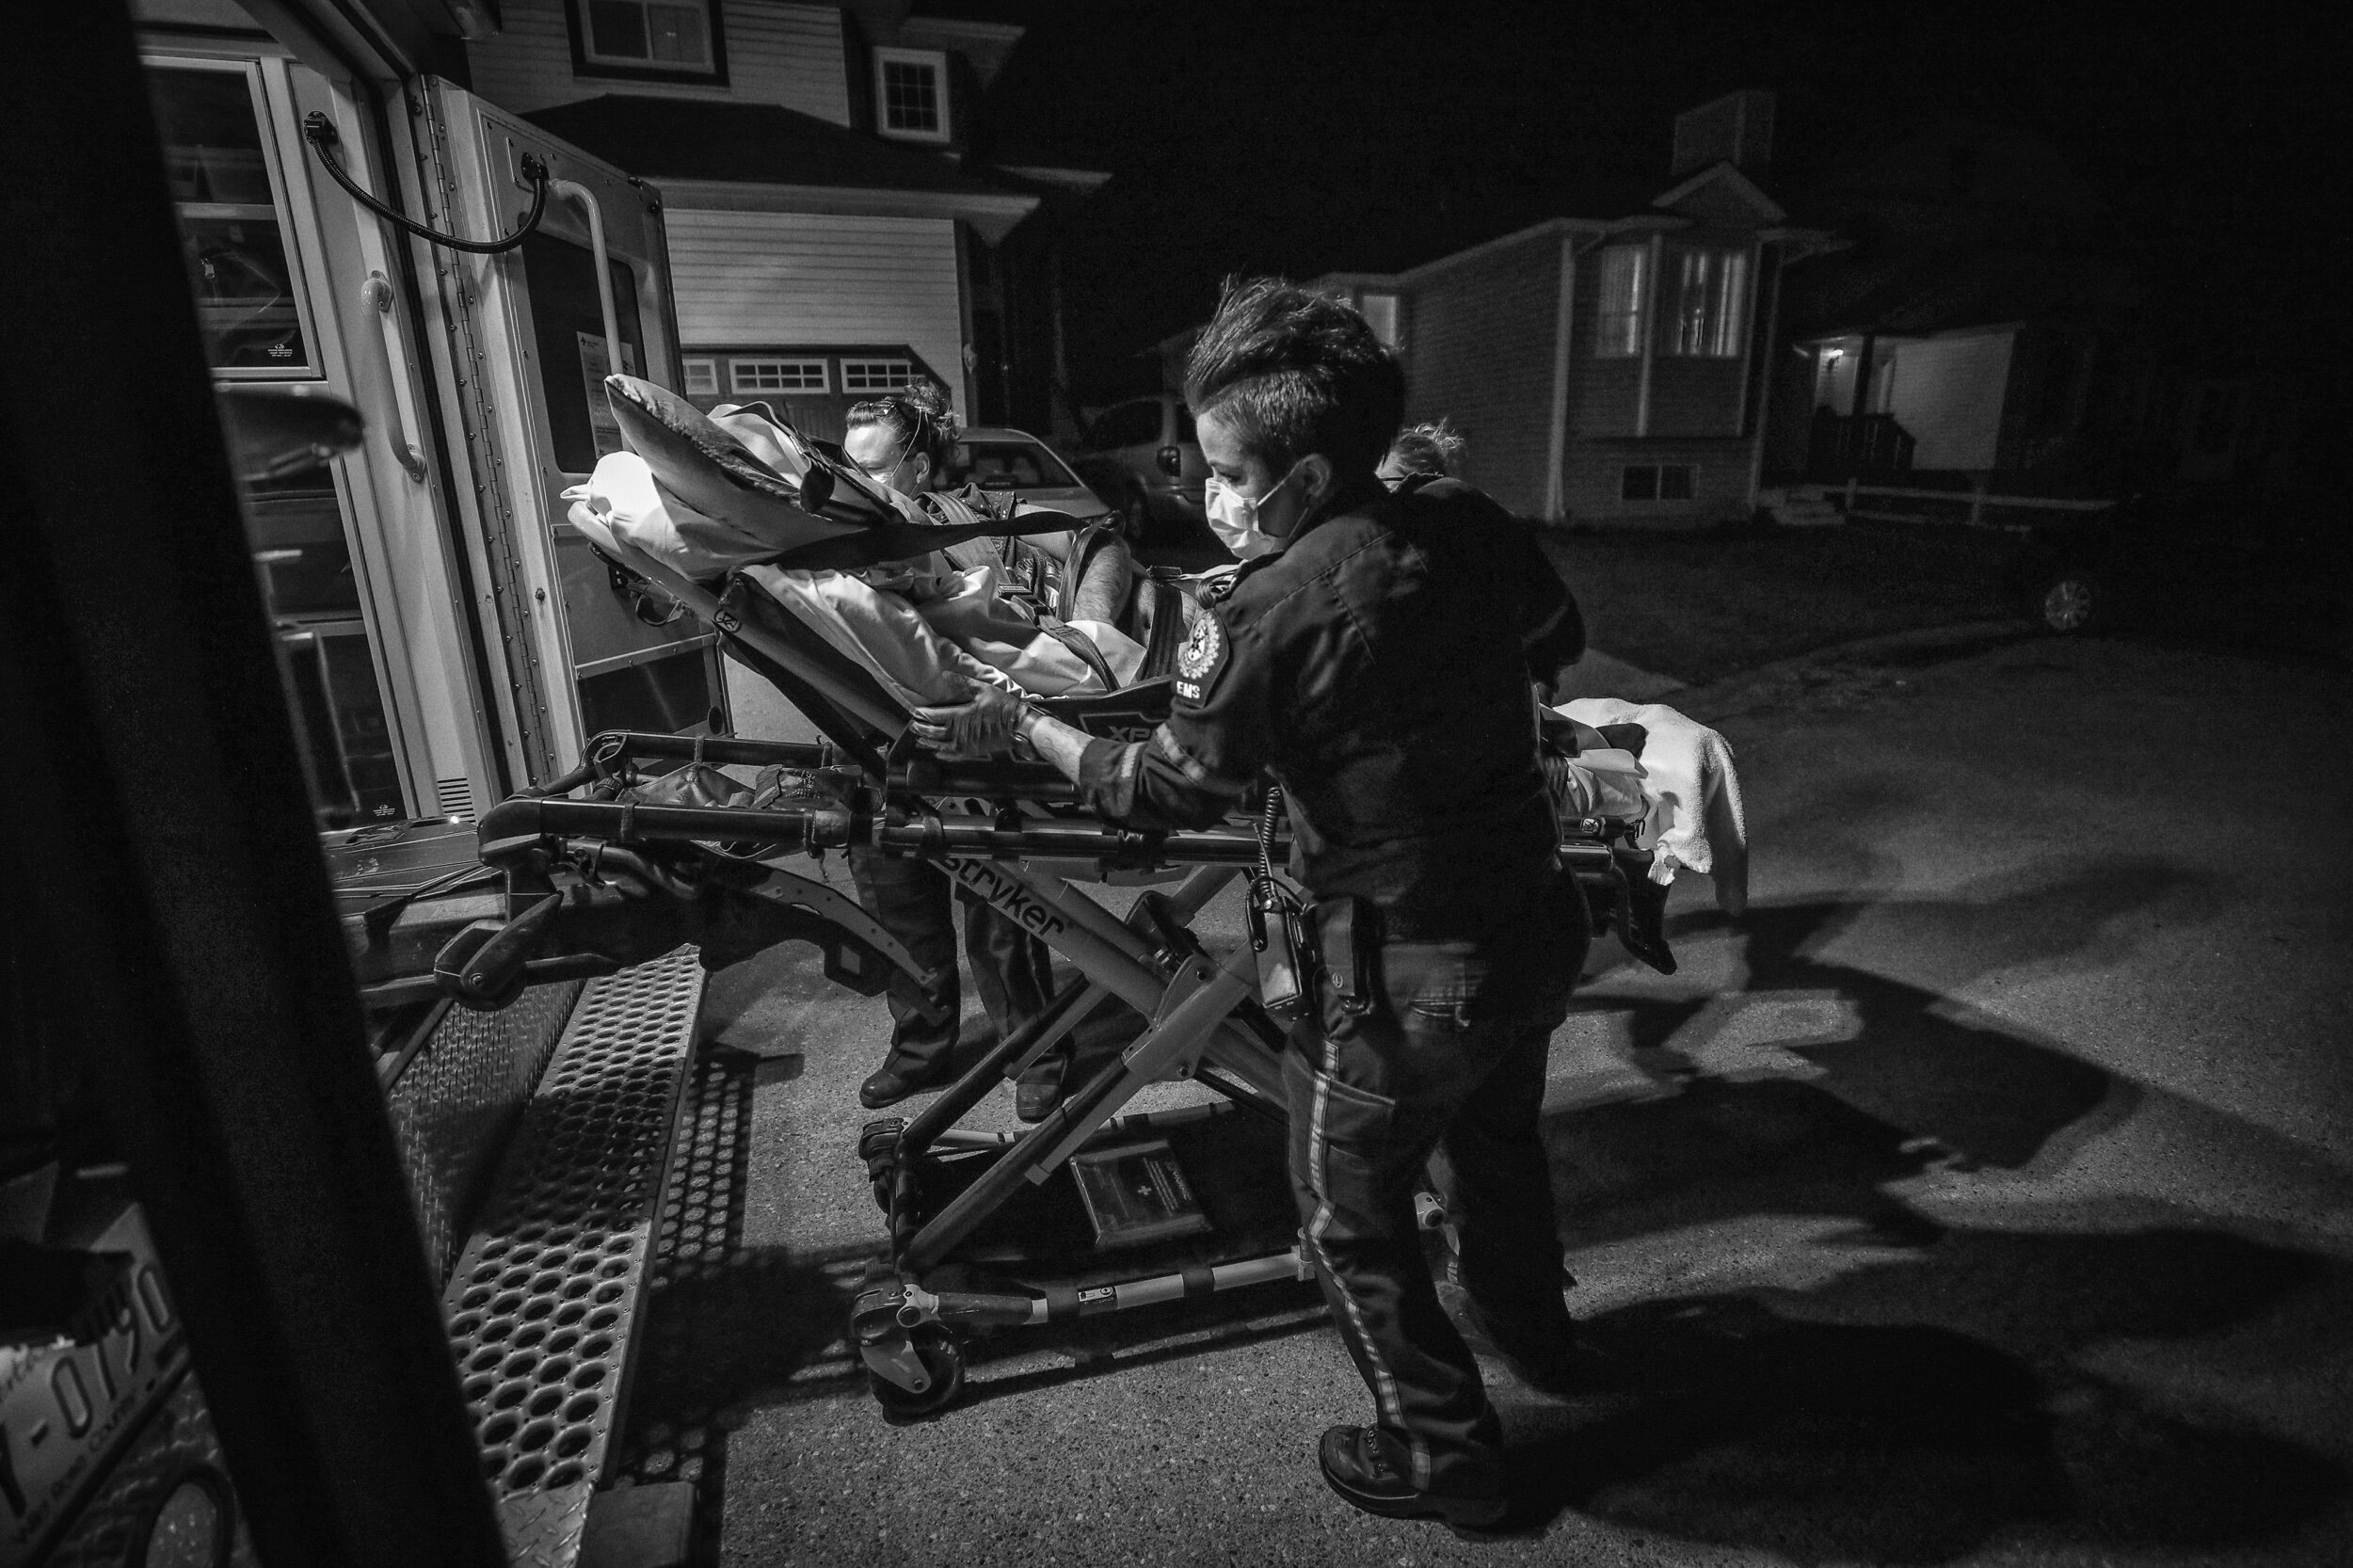  During a summertime night shift, paramedics transport a patient to hospital in Calgary, Alberta. 